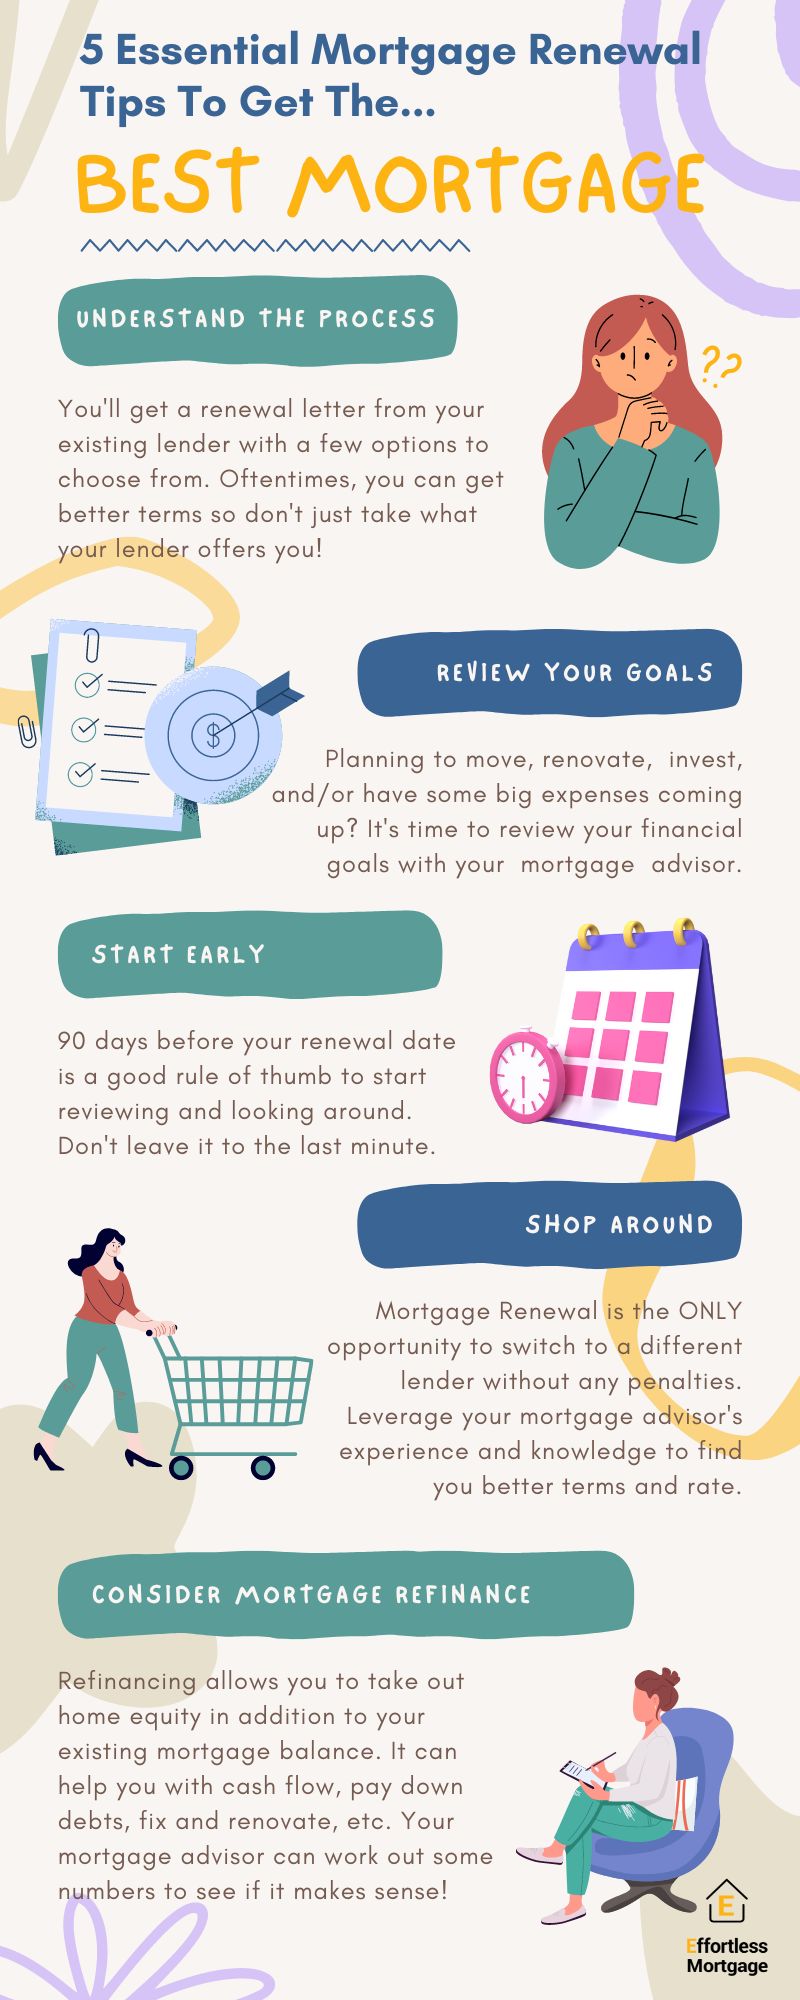 Mortgage Renewal Infographic by Effortless Mortgage